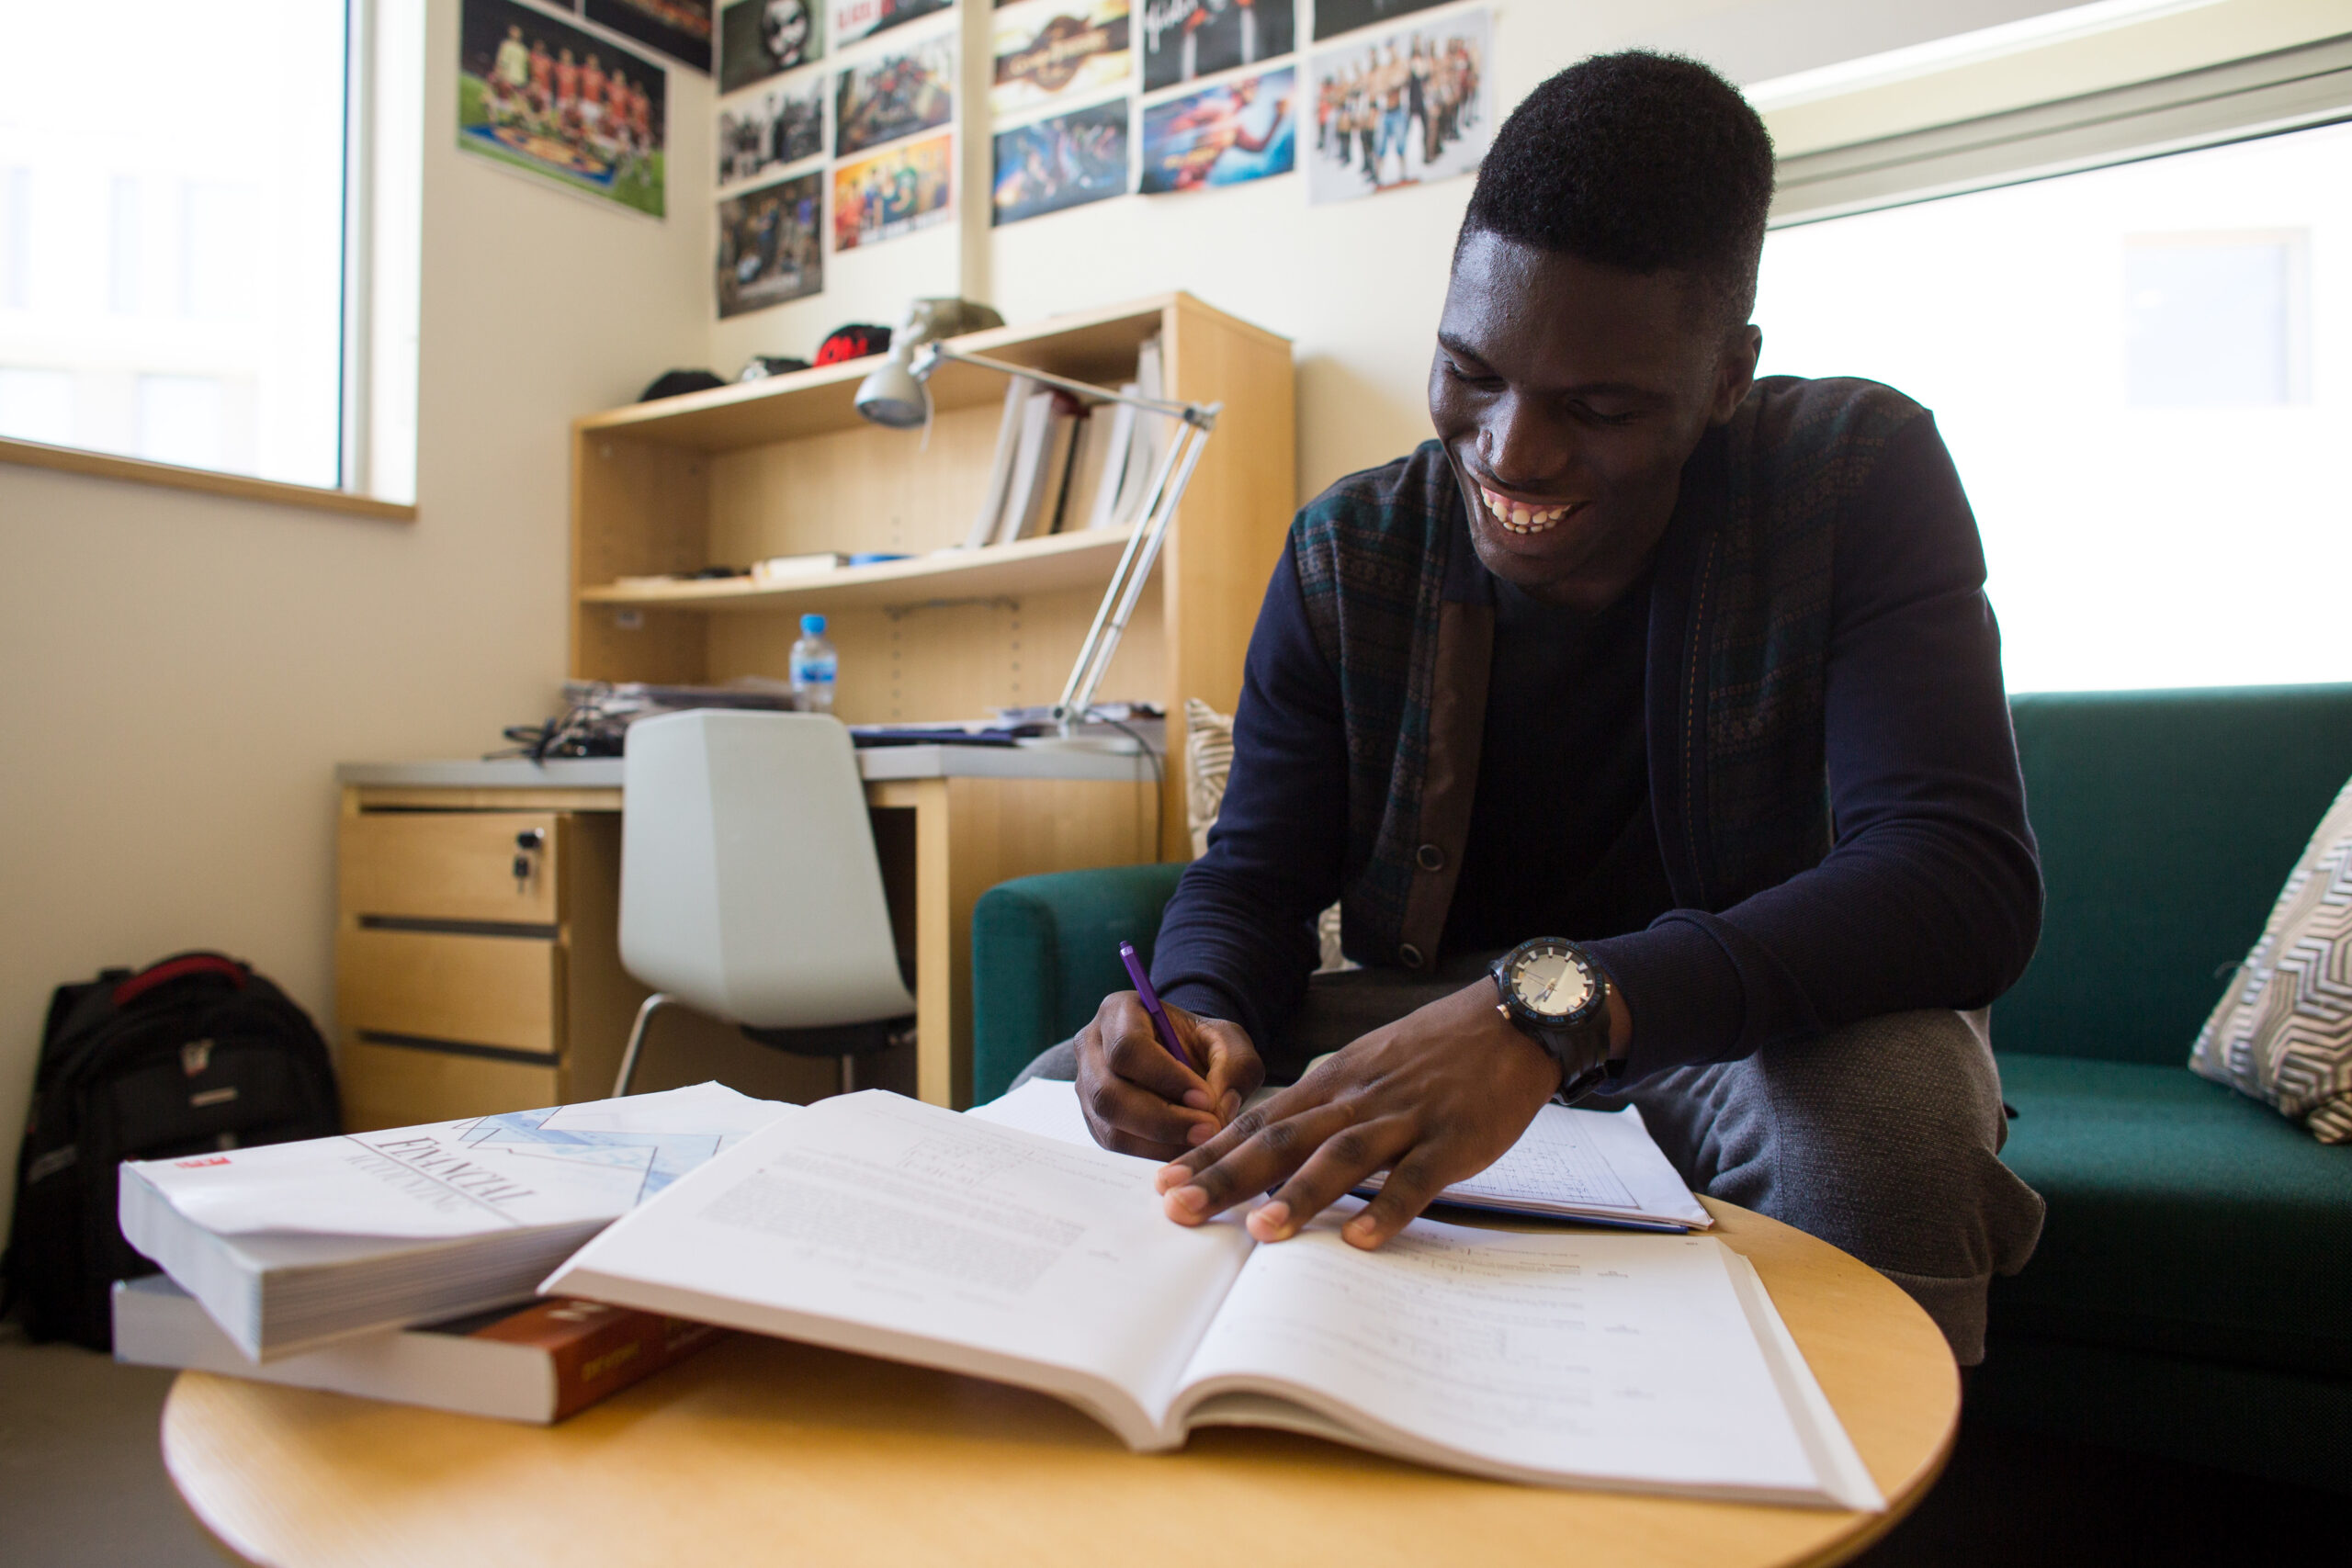 A Black male student writes in a notebook in a dorm room.